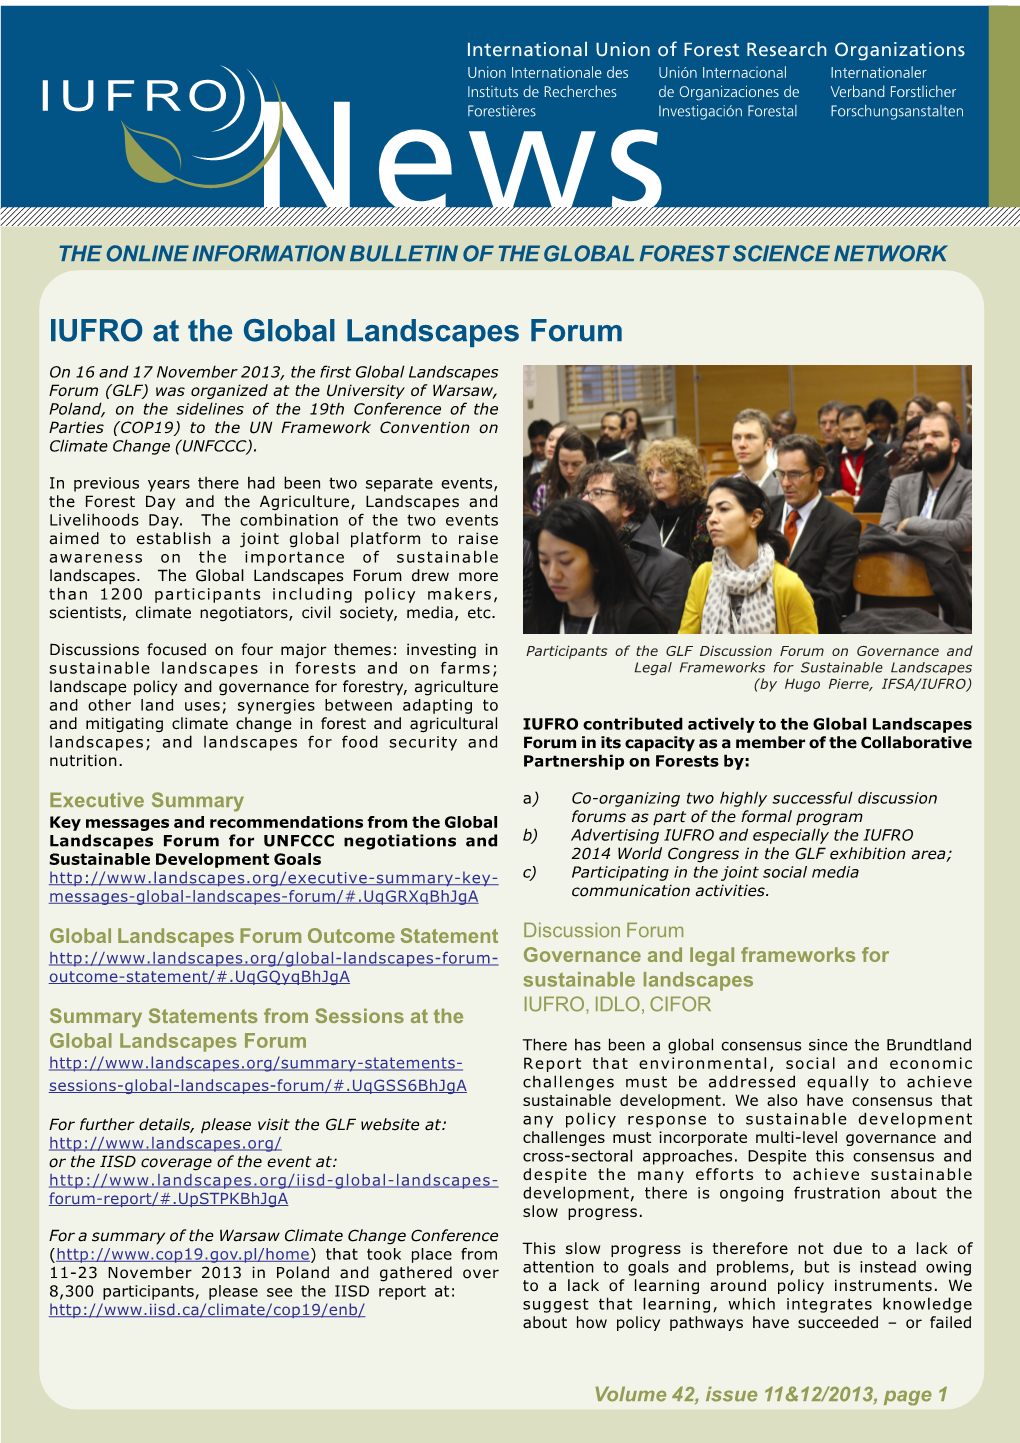 IUFRO at the Global Landscapes Forum